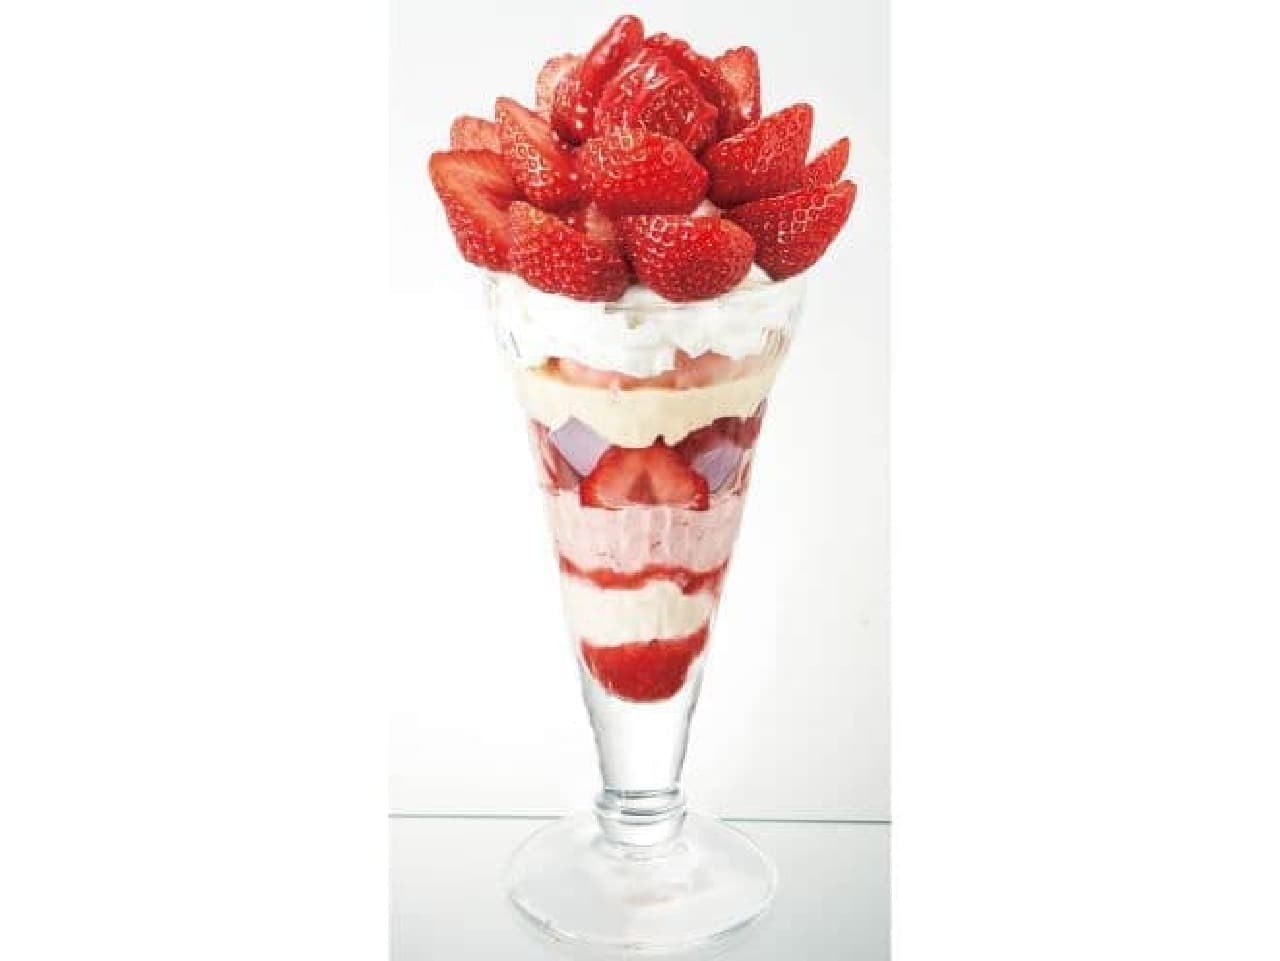 "Amaou Princess Sunday" is a red and glossy sundae made from 10 large Hakata strawberries.